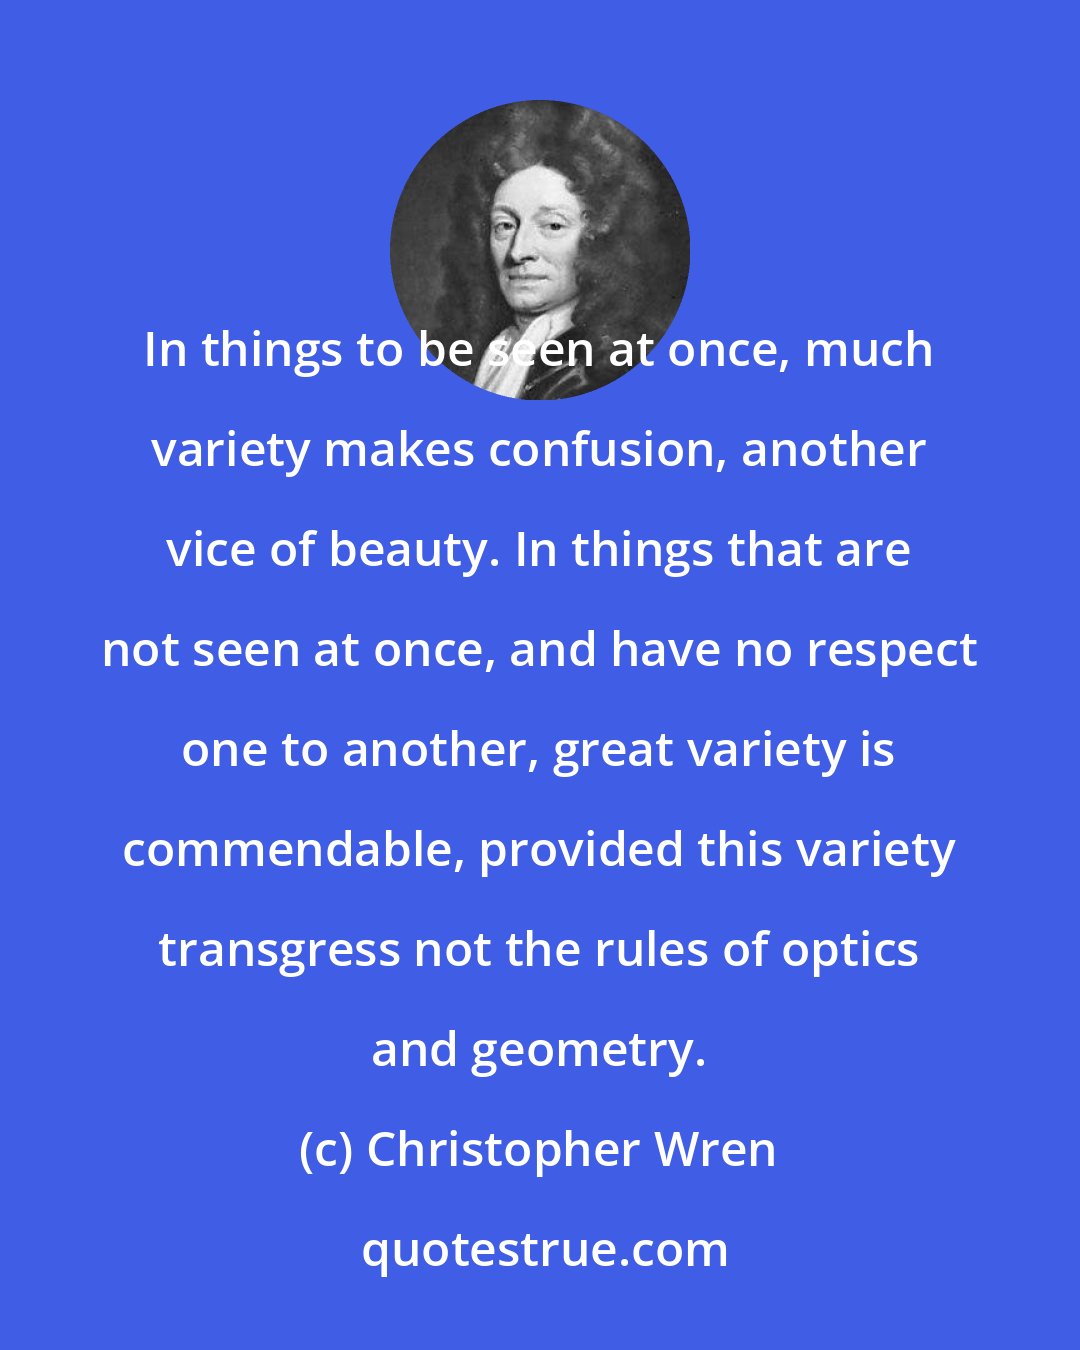 Christopher Wren: In things to be seen at once, much variety makes confusion, another vice of beauty. In things that are not seen at once, and have no respect one to another, great variety is commendable, provided this variety transgress not the rules of optics and geometry.